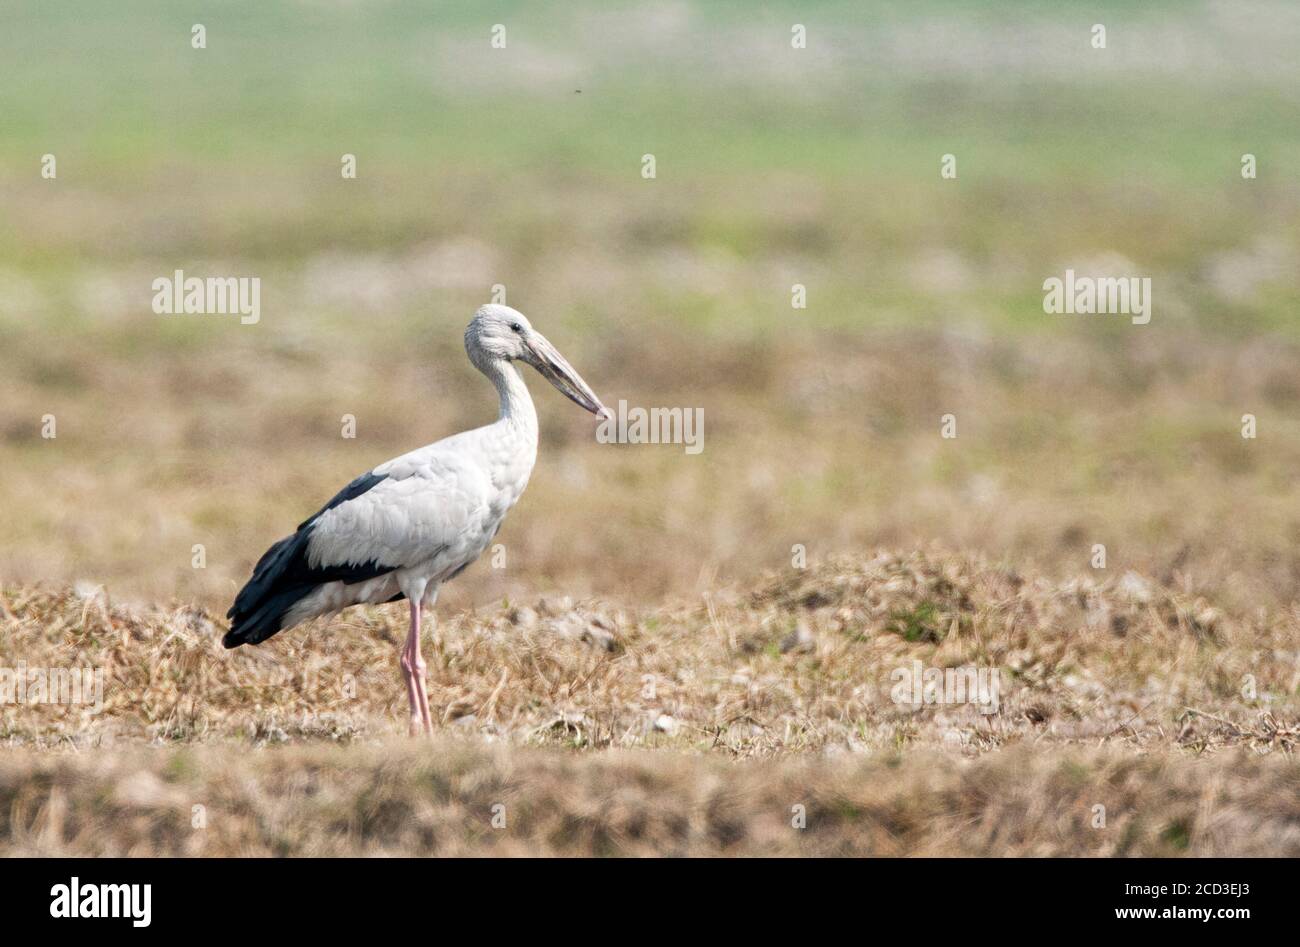 Asian open-bill stork (Anastomus oscitans), standing on agricultural land, India Stock Photo